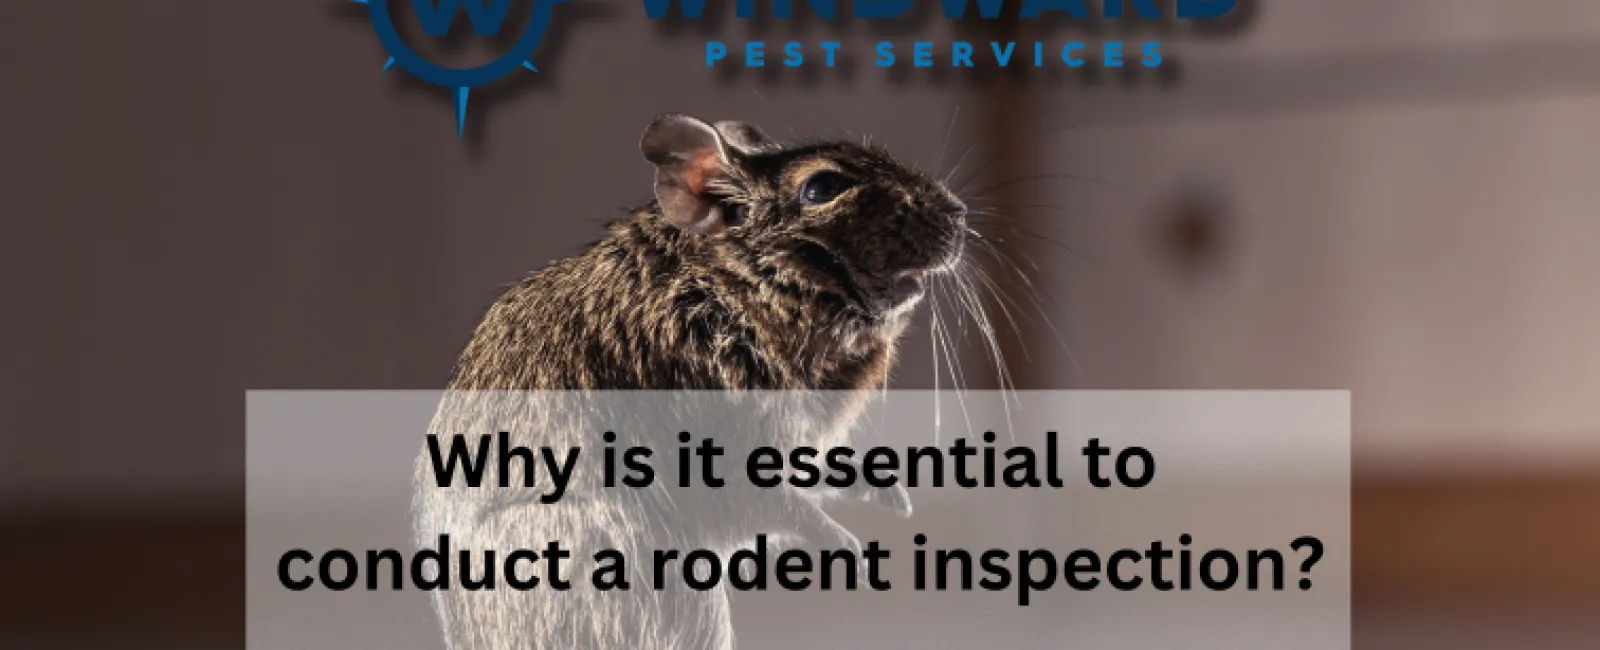 Rodent Inspection